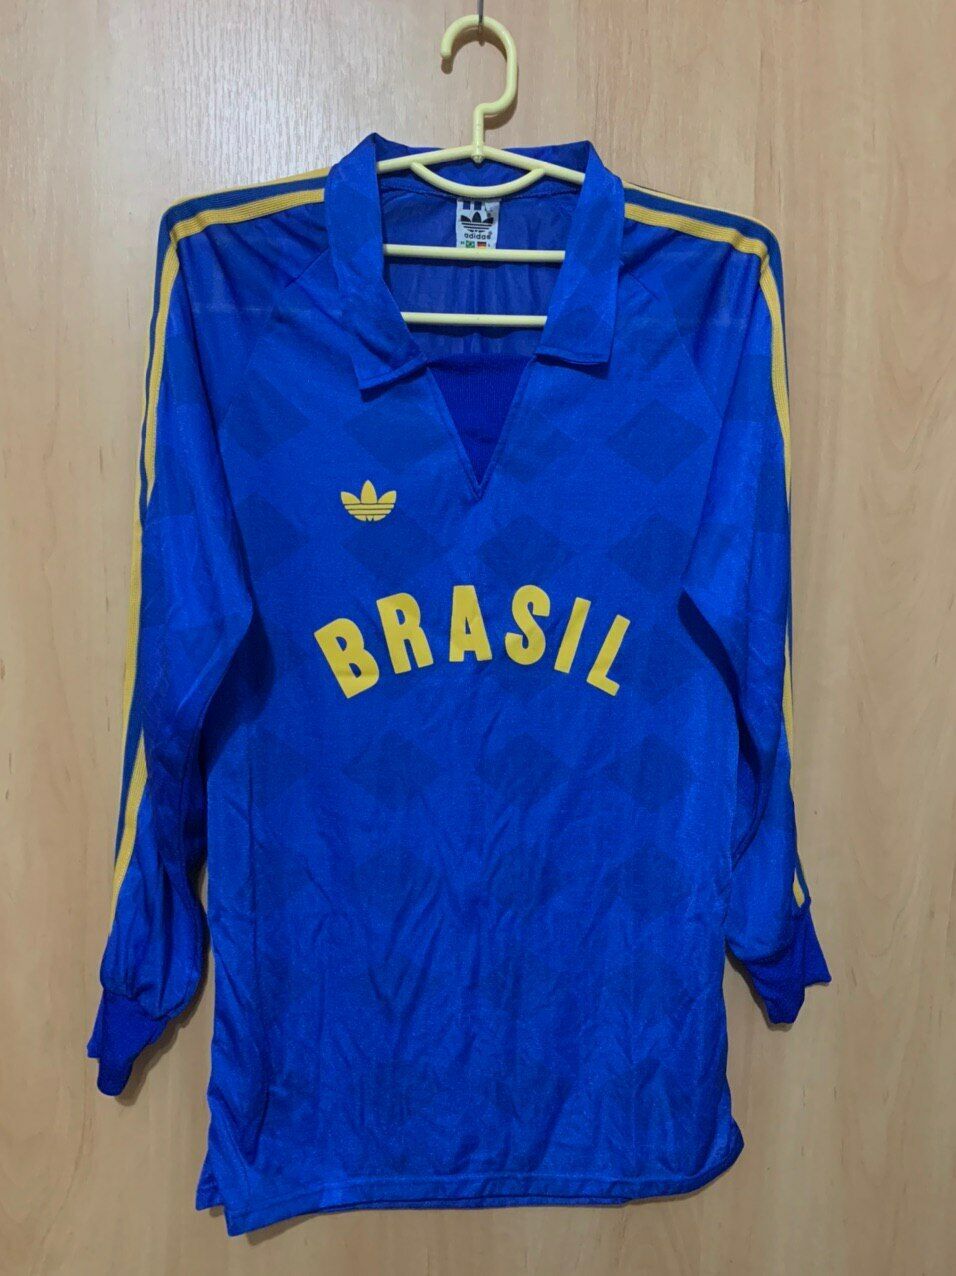 BRAZIL NATIONAL TEAM 1988 OLYMPIC GAME FOOTBALL SHIRT JERSEY VINTAGE L/S ADIDAS